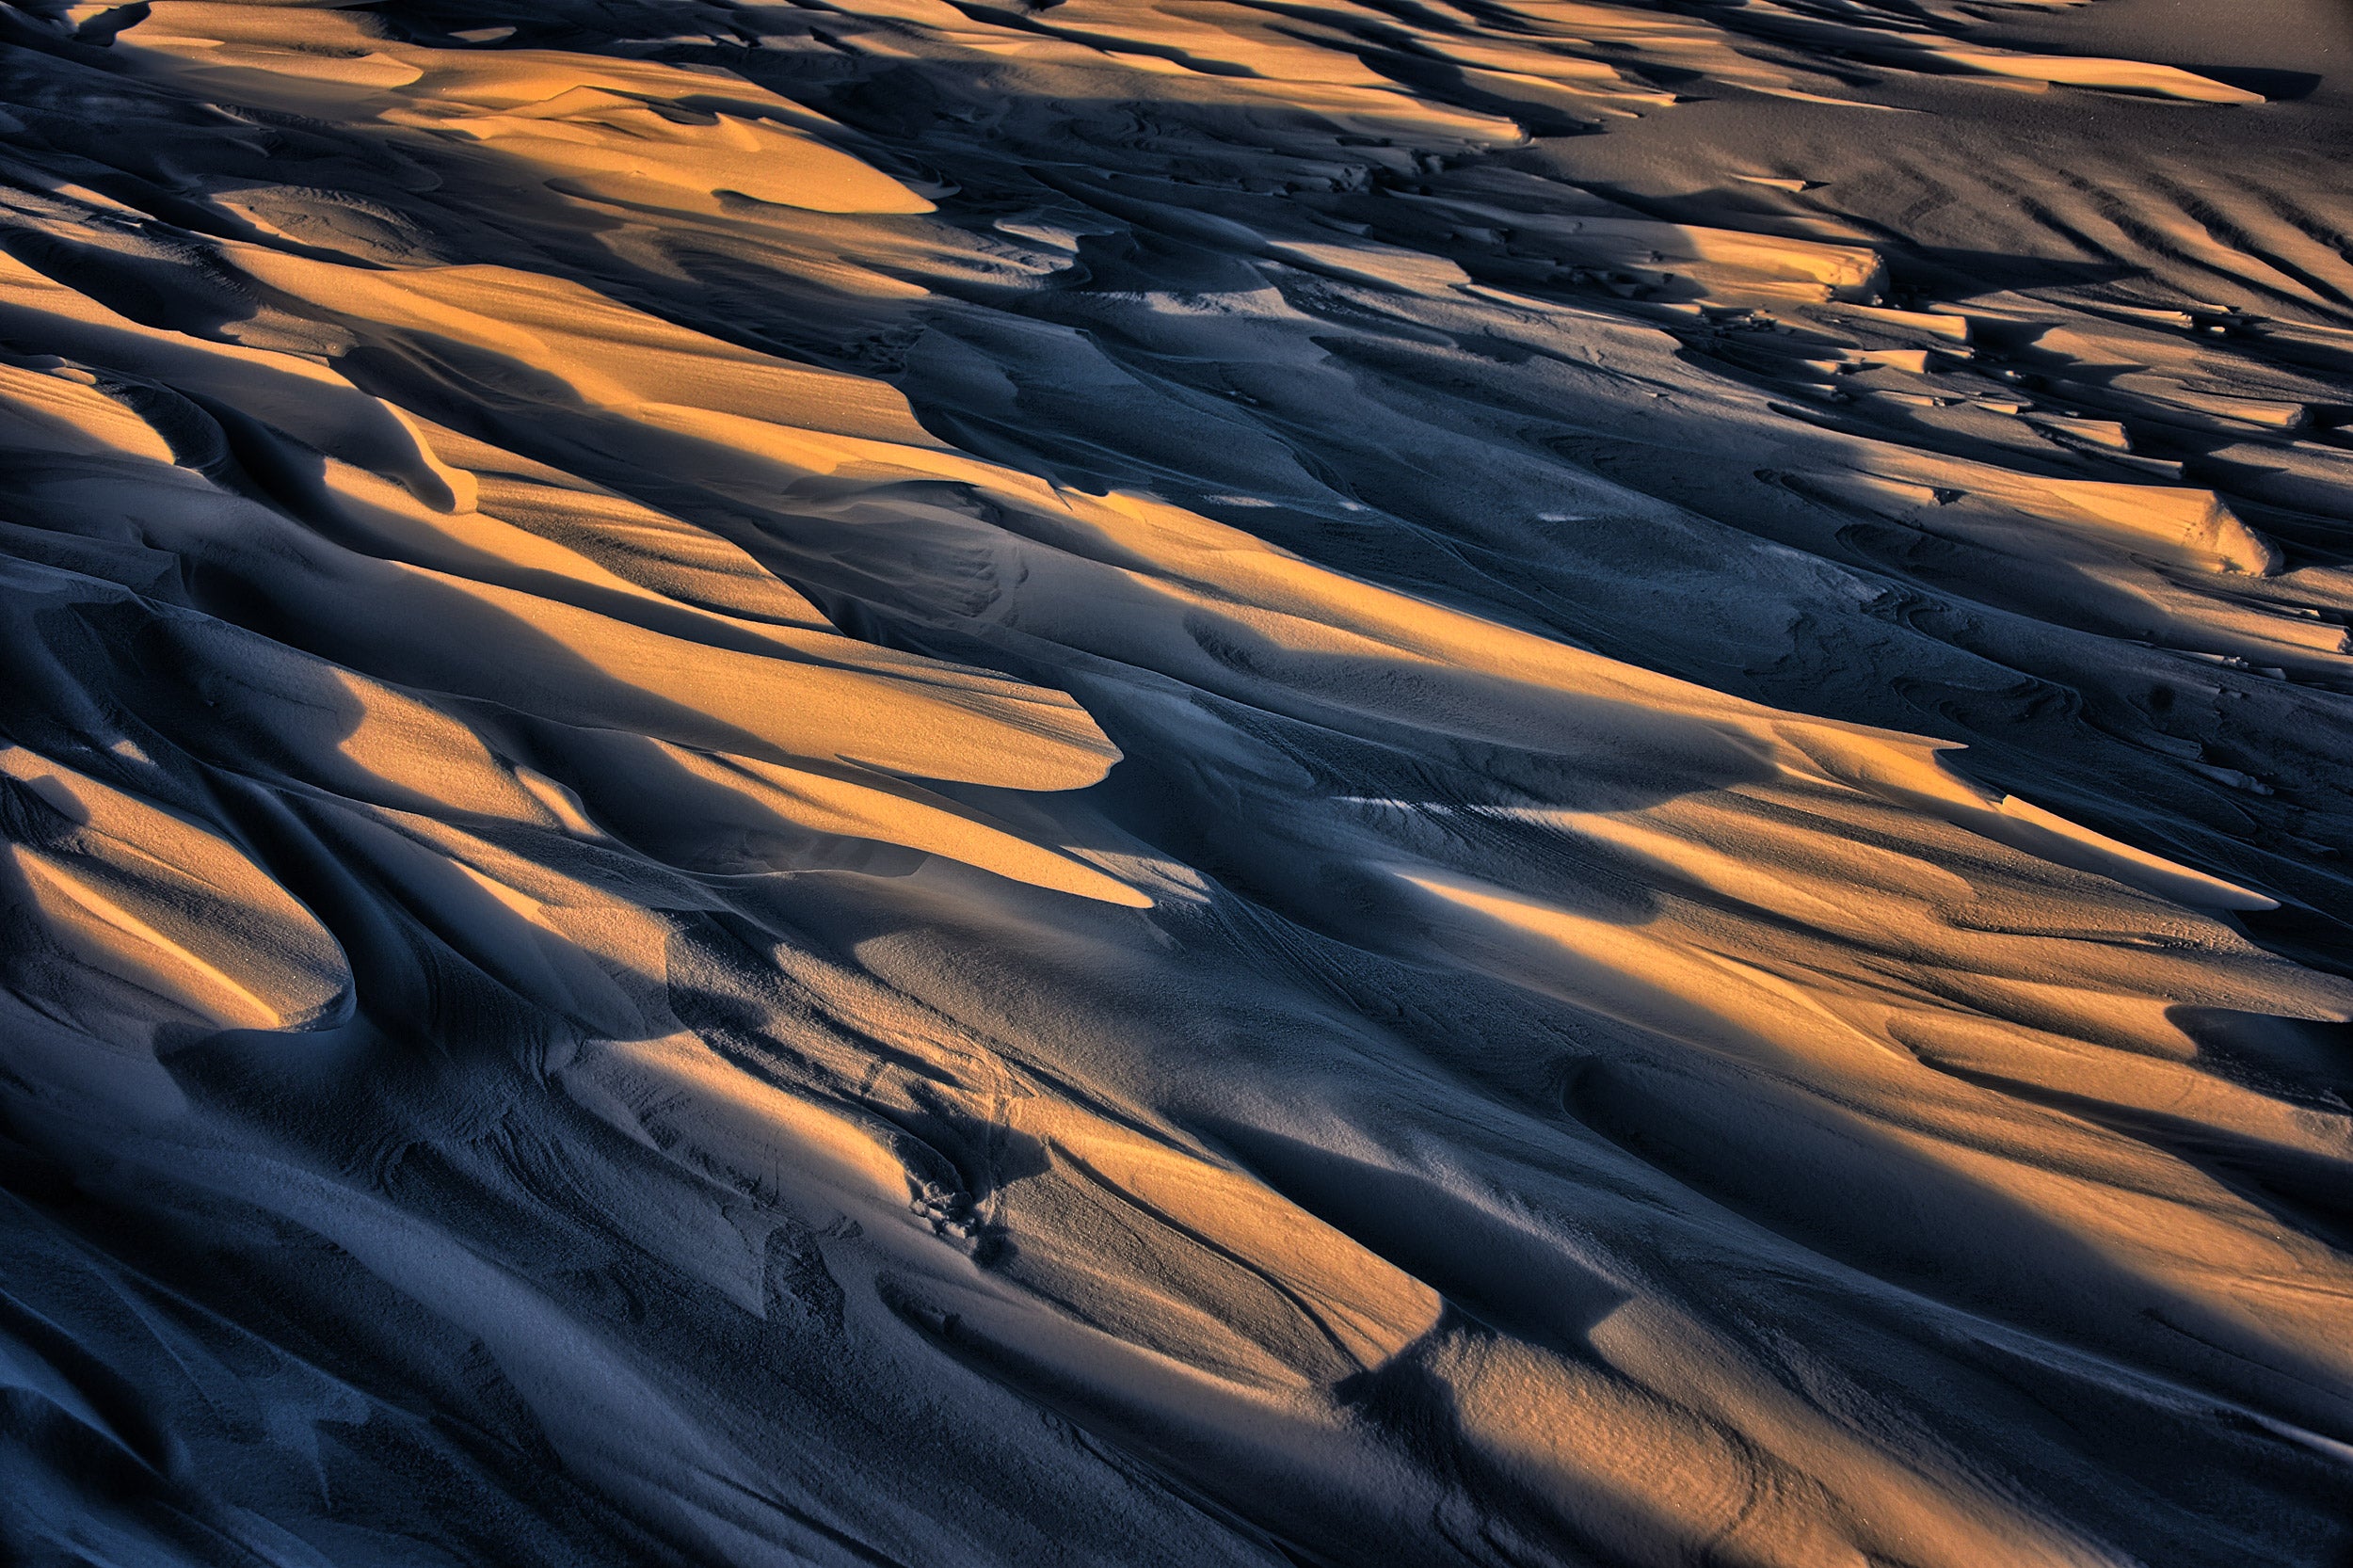 Dune-like formations sculpted by the wind called Sastrugi cast shadows on ice.